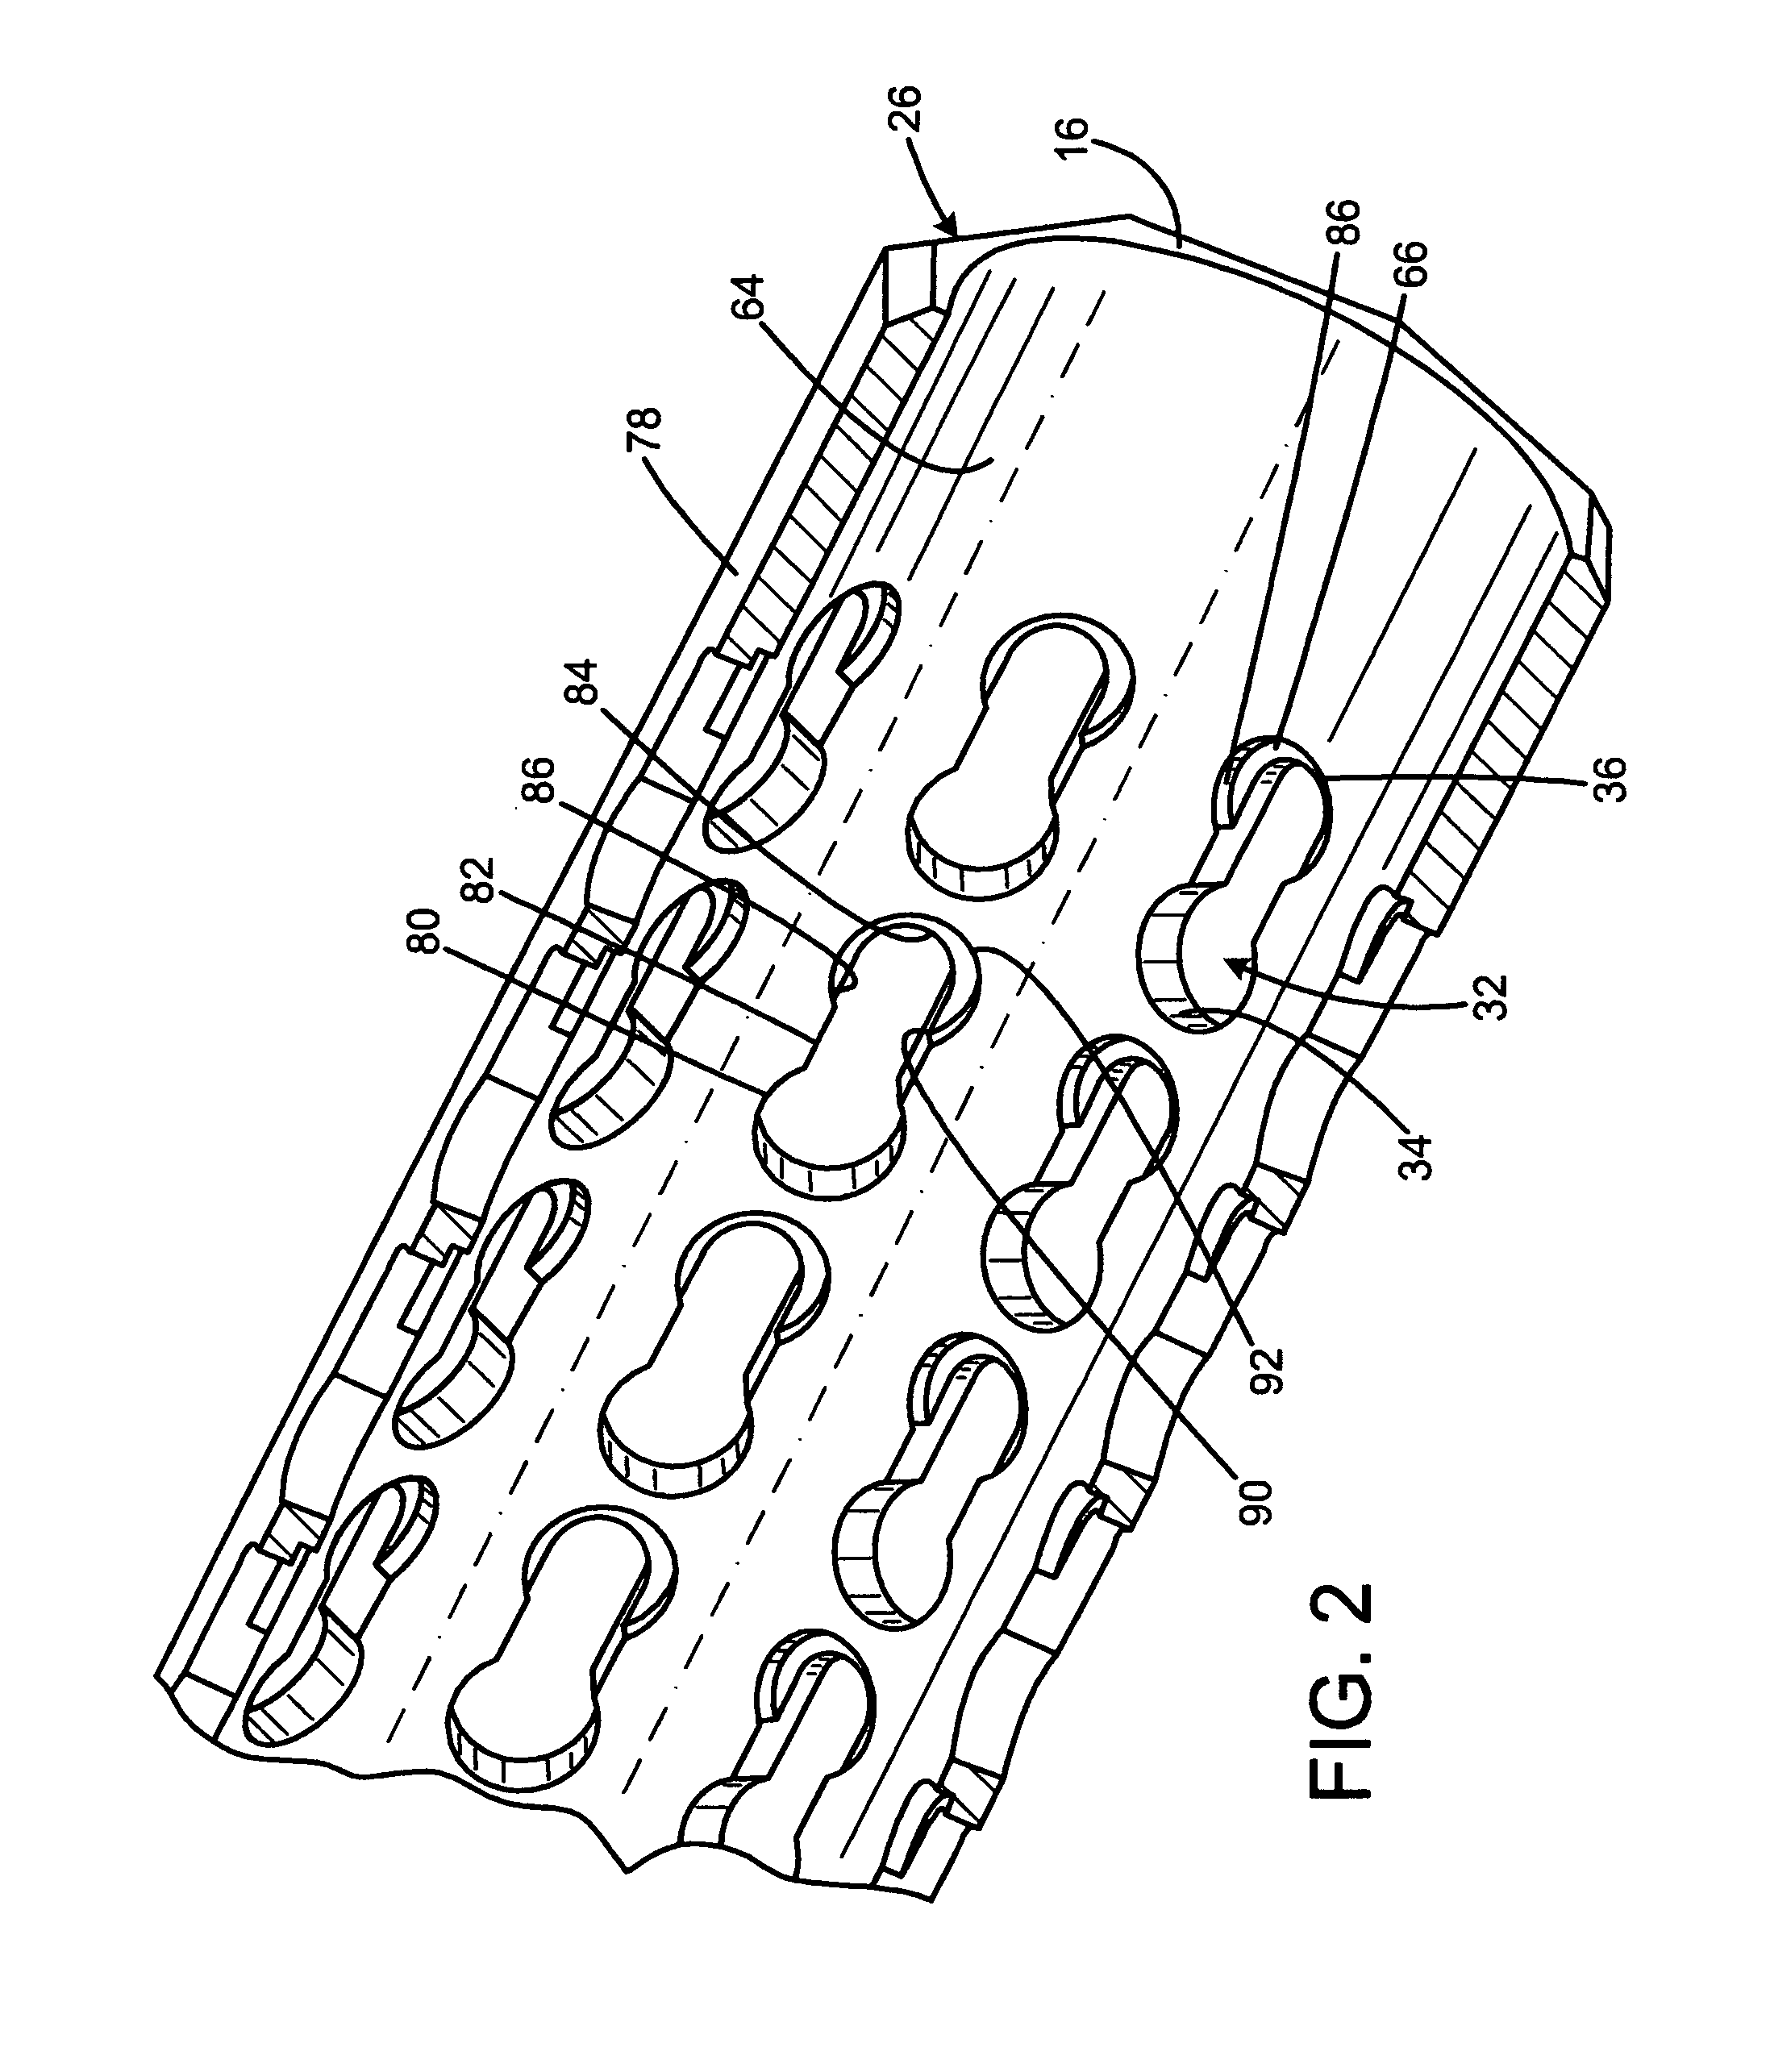 Firearm with keyhole-shaped rail mounting points